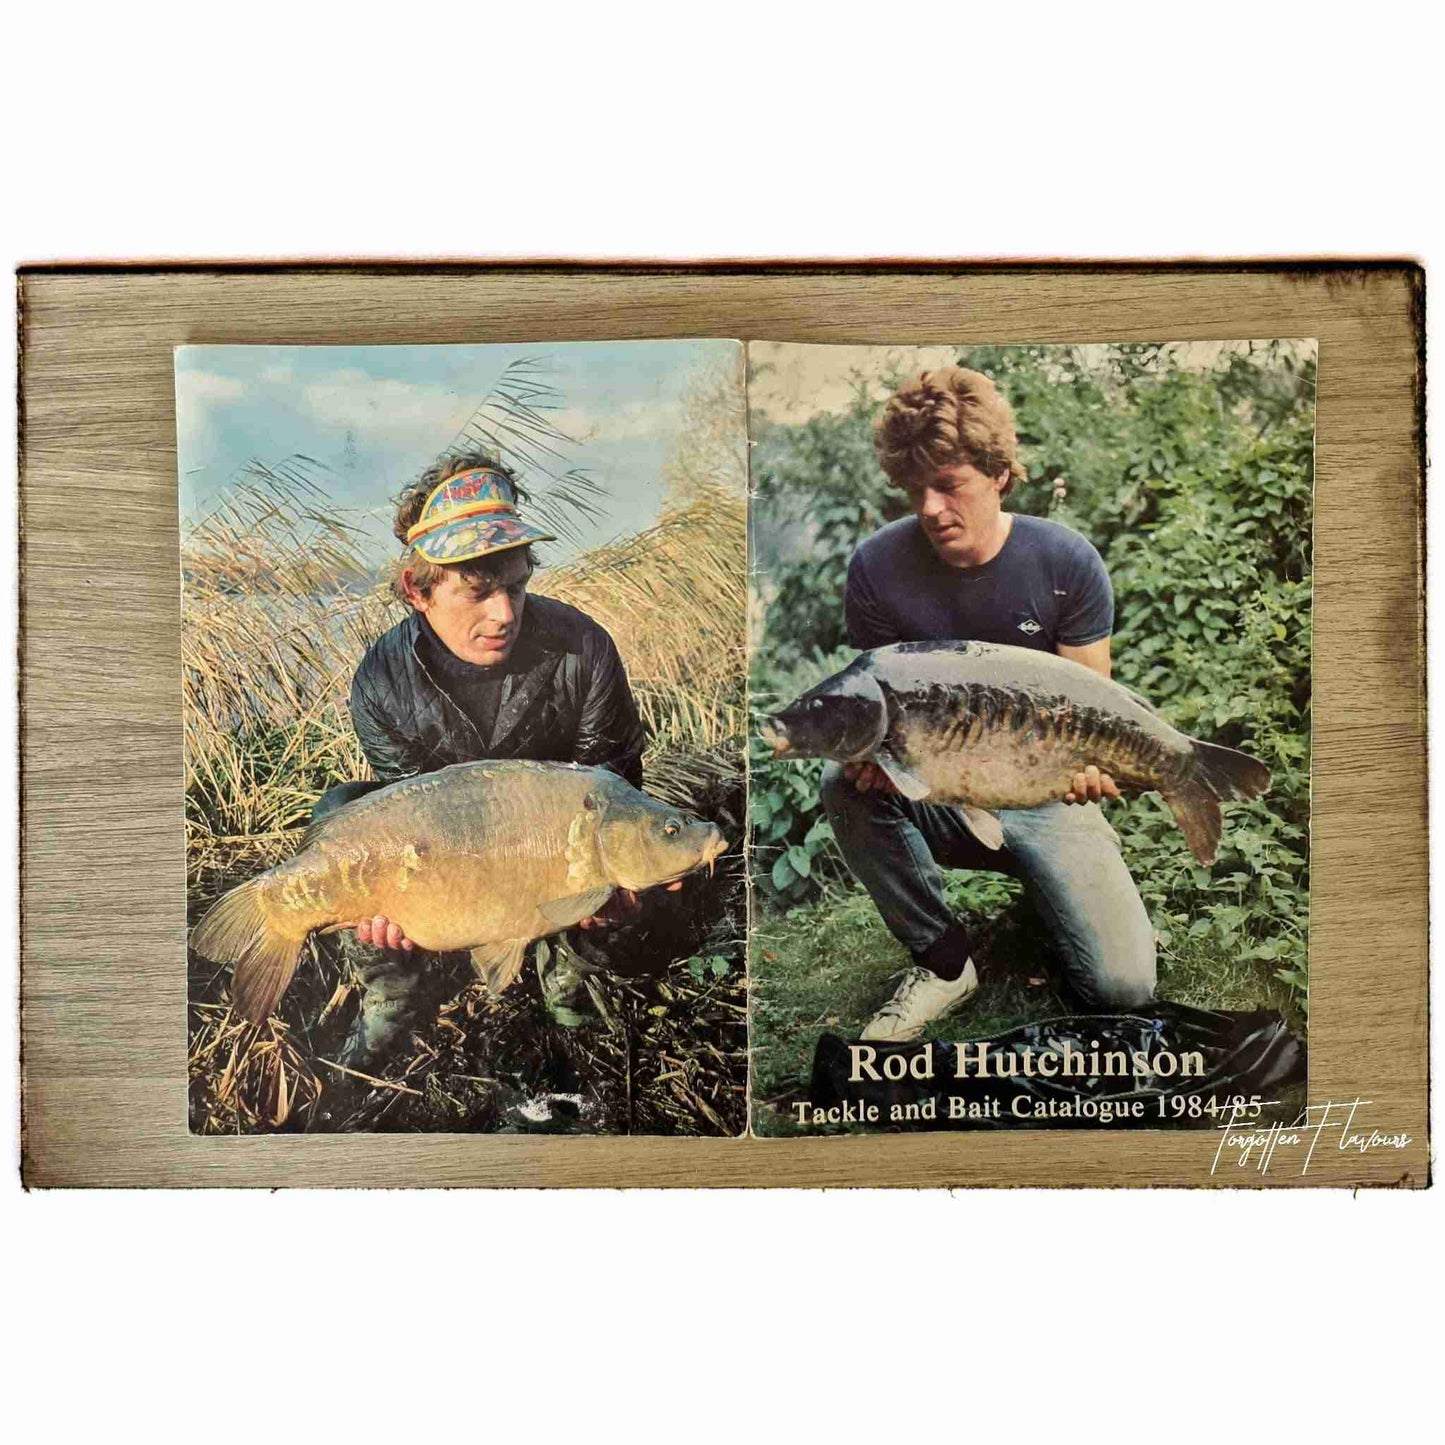 Rod Hutchinson tackle and bait catalogue 1984/85 - Forgotten Flavours & On Point